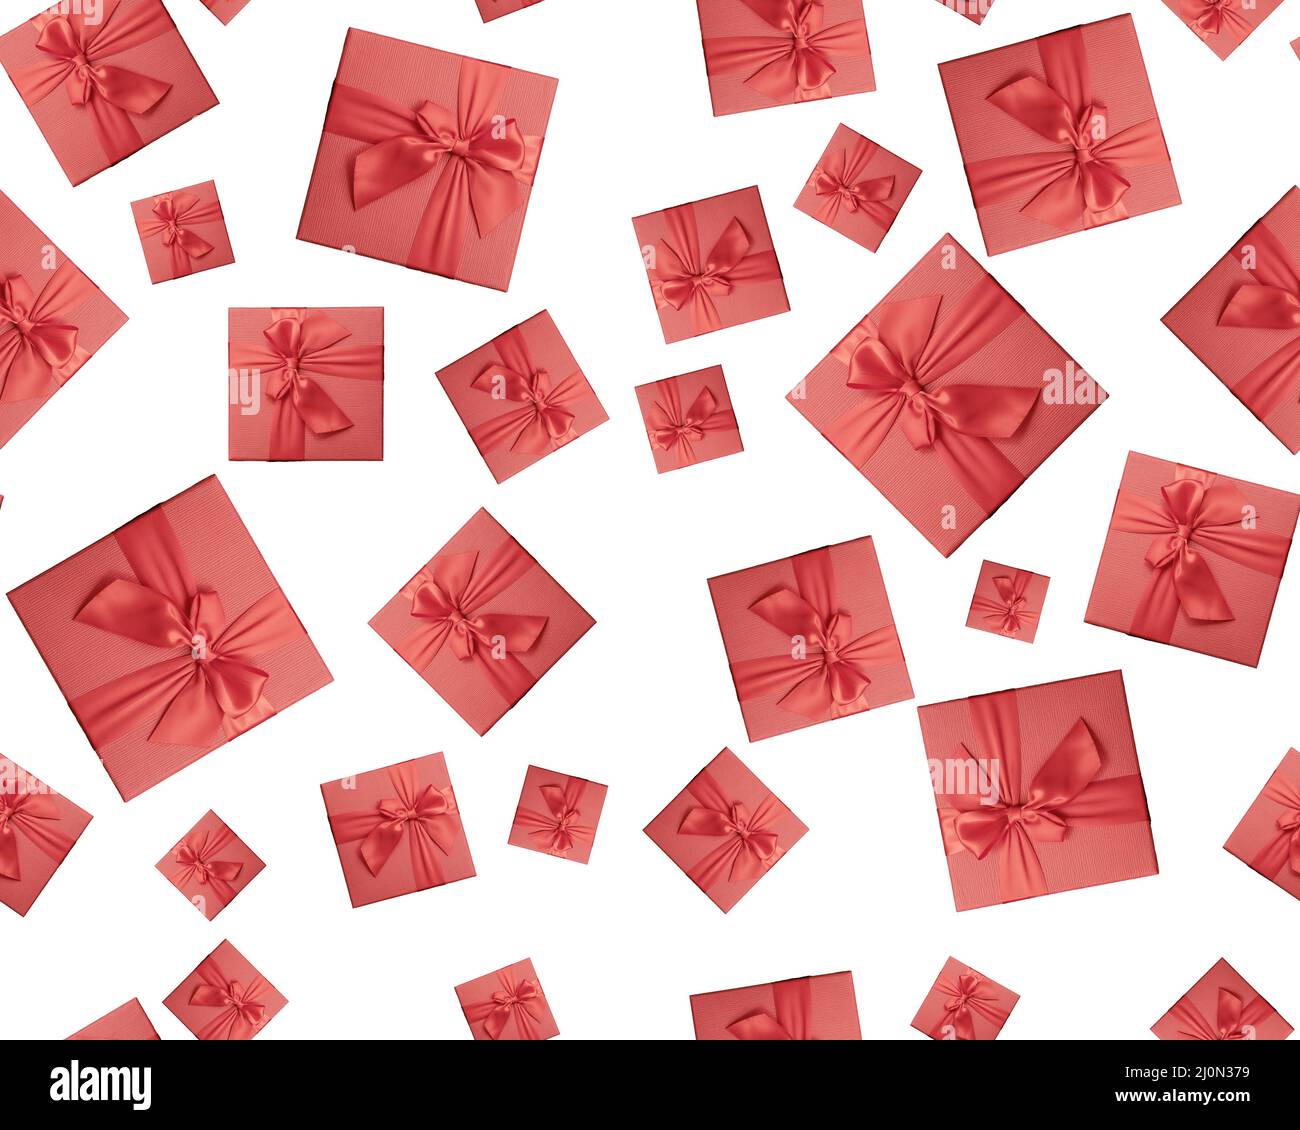 Seamless background with gifts. Gift boxes with a red bow. Top view Isolated background. Black Friday Stock Photo